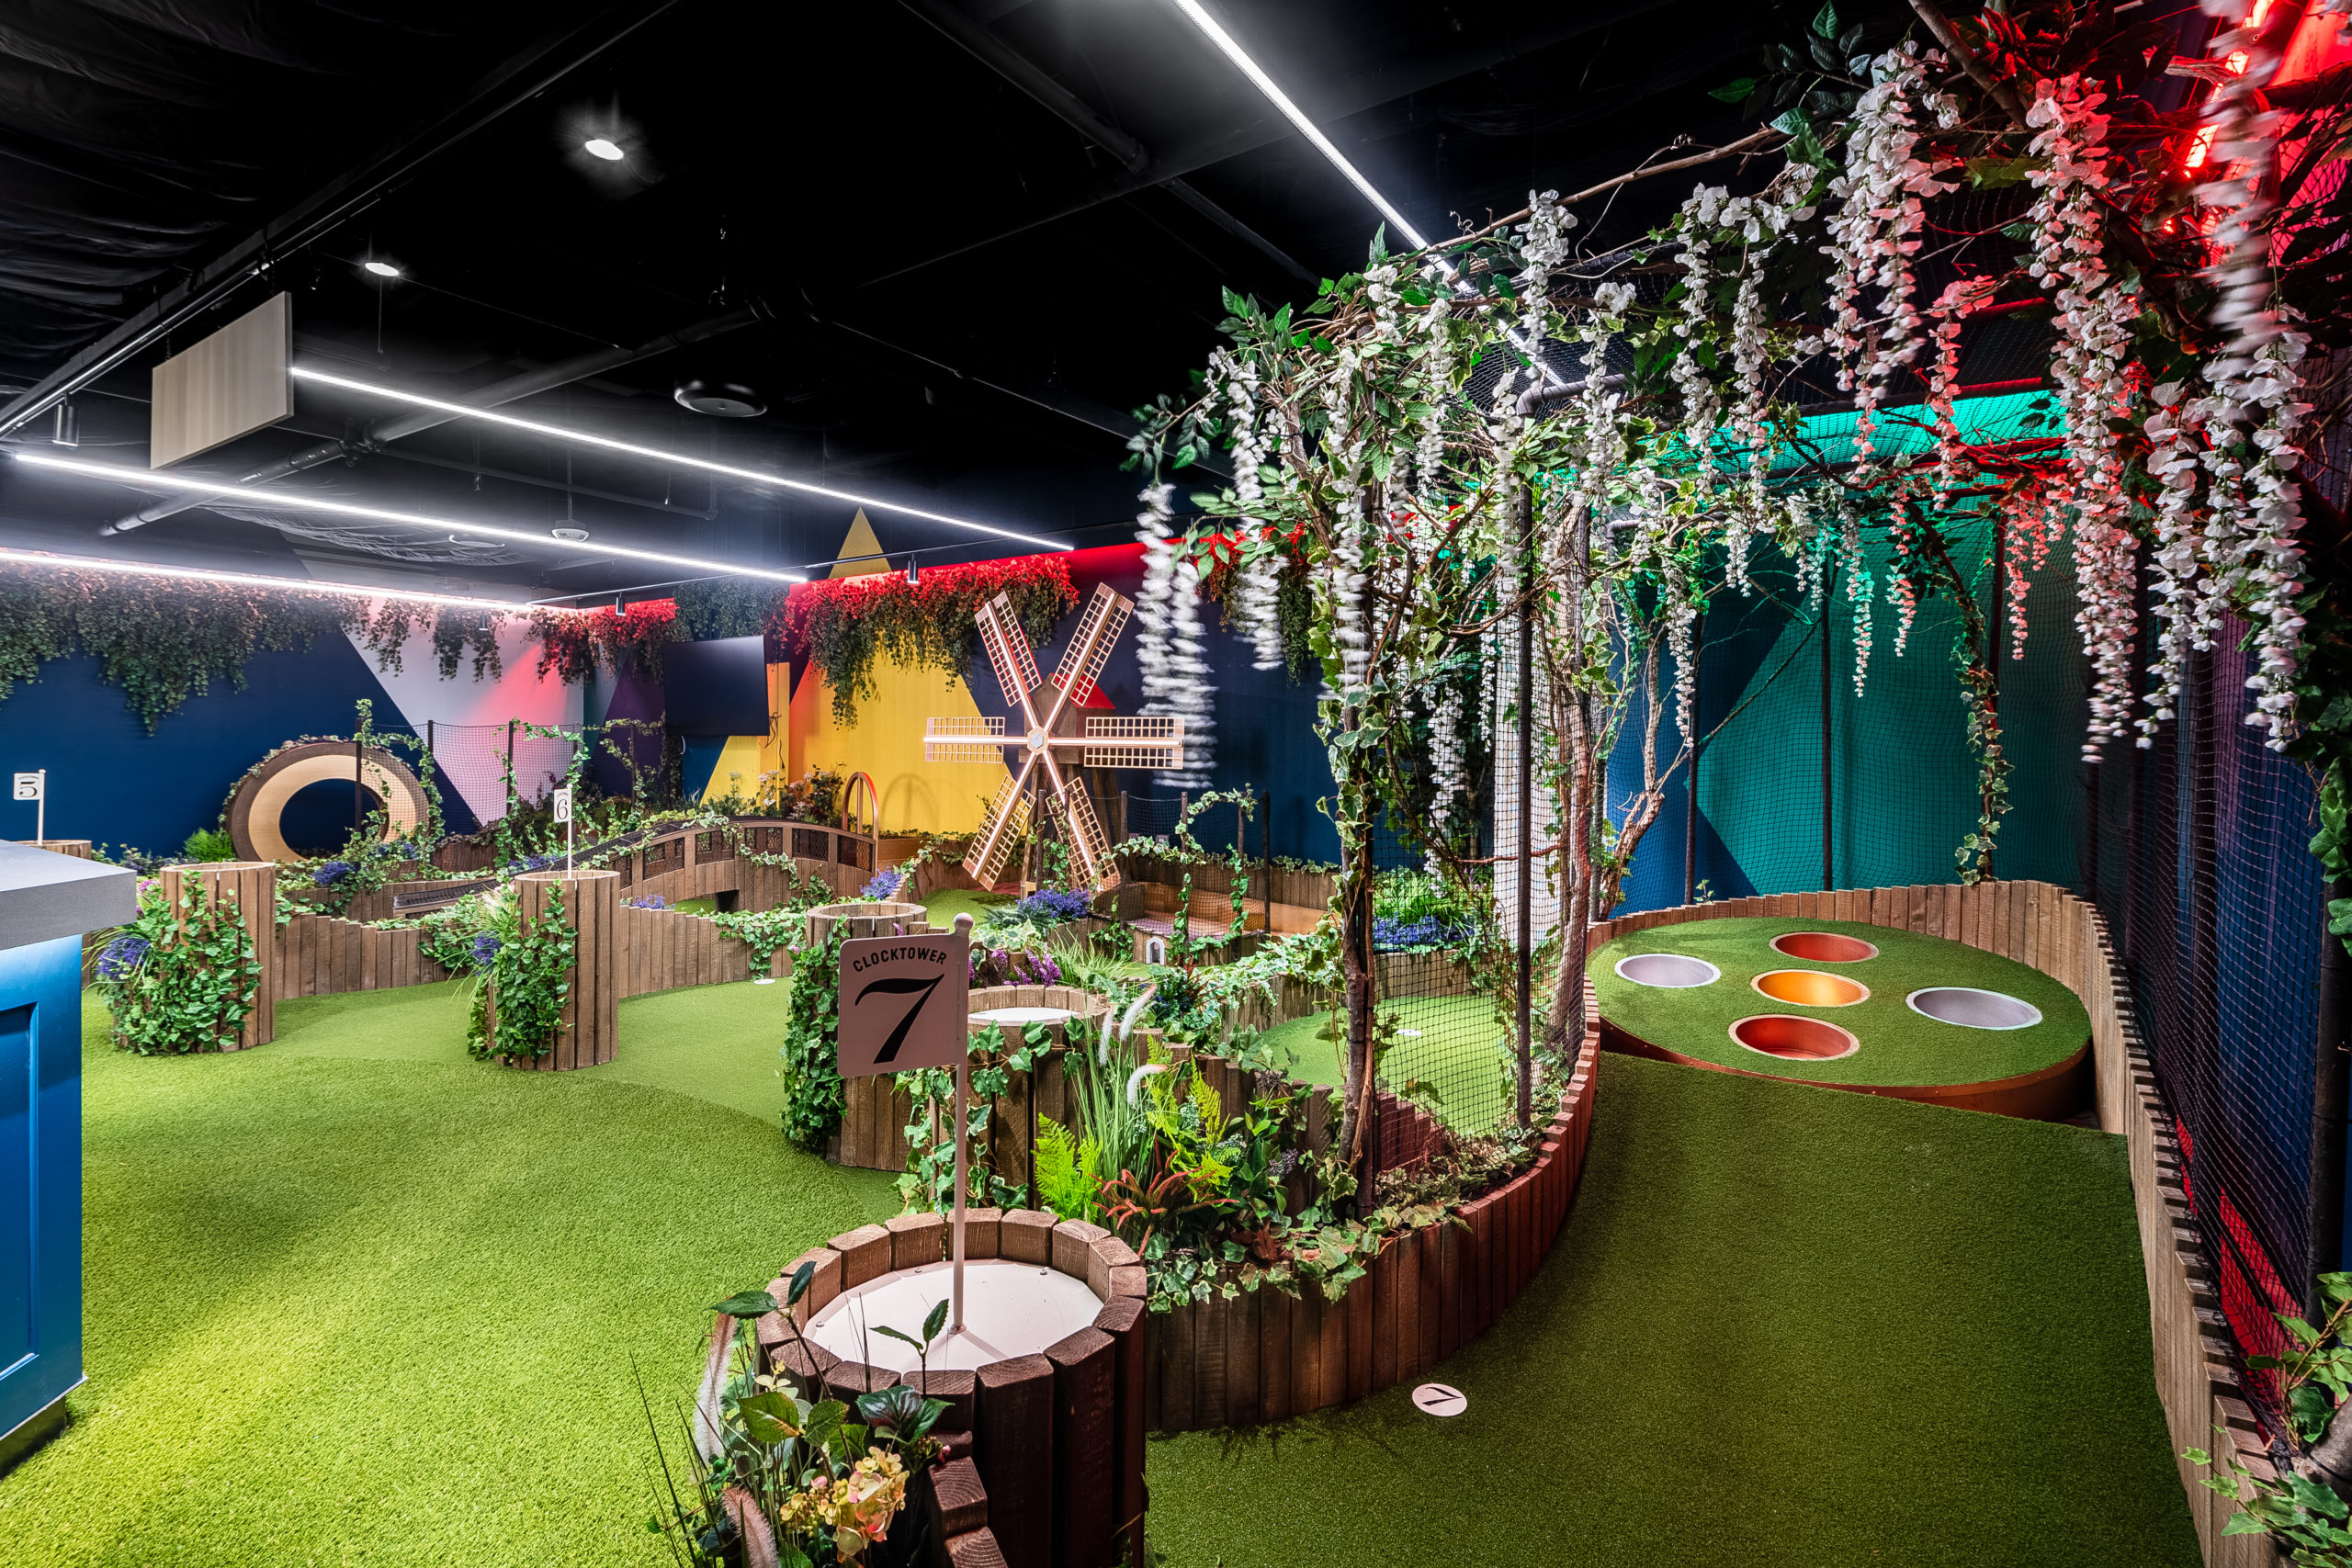 Swingers Brings Crazy Golf to image